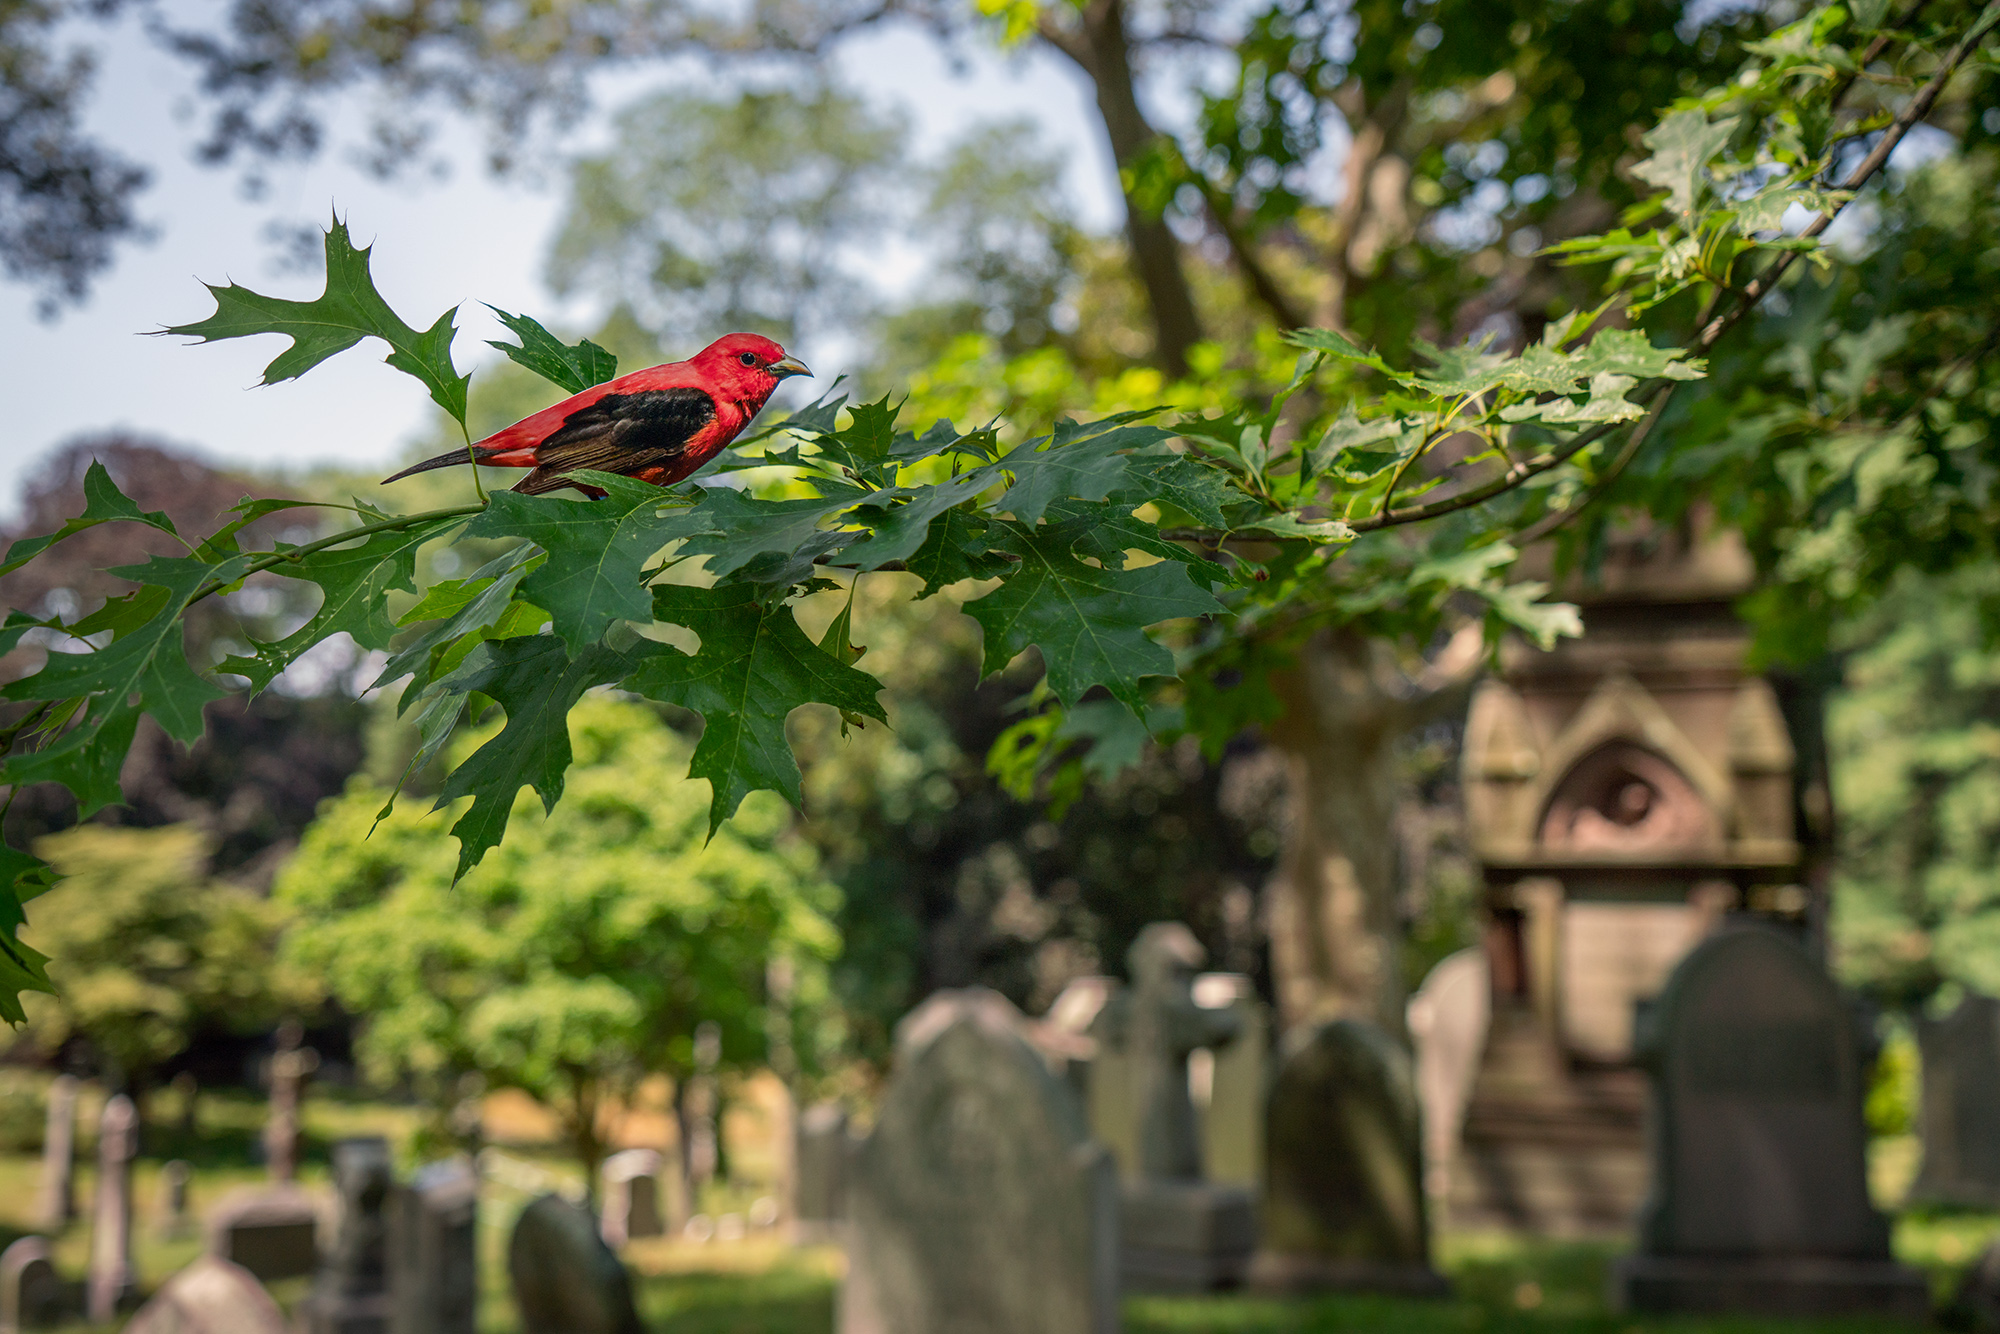 A photograph of a paper cutout of a photo of a Scarlet Tanager bird sitting in an oak tree. The background, which is out of focus, shows grave markers indicating that the location is a cemetery.